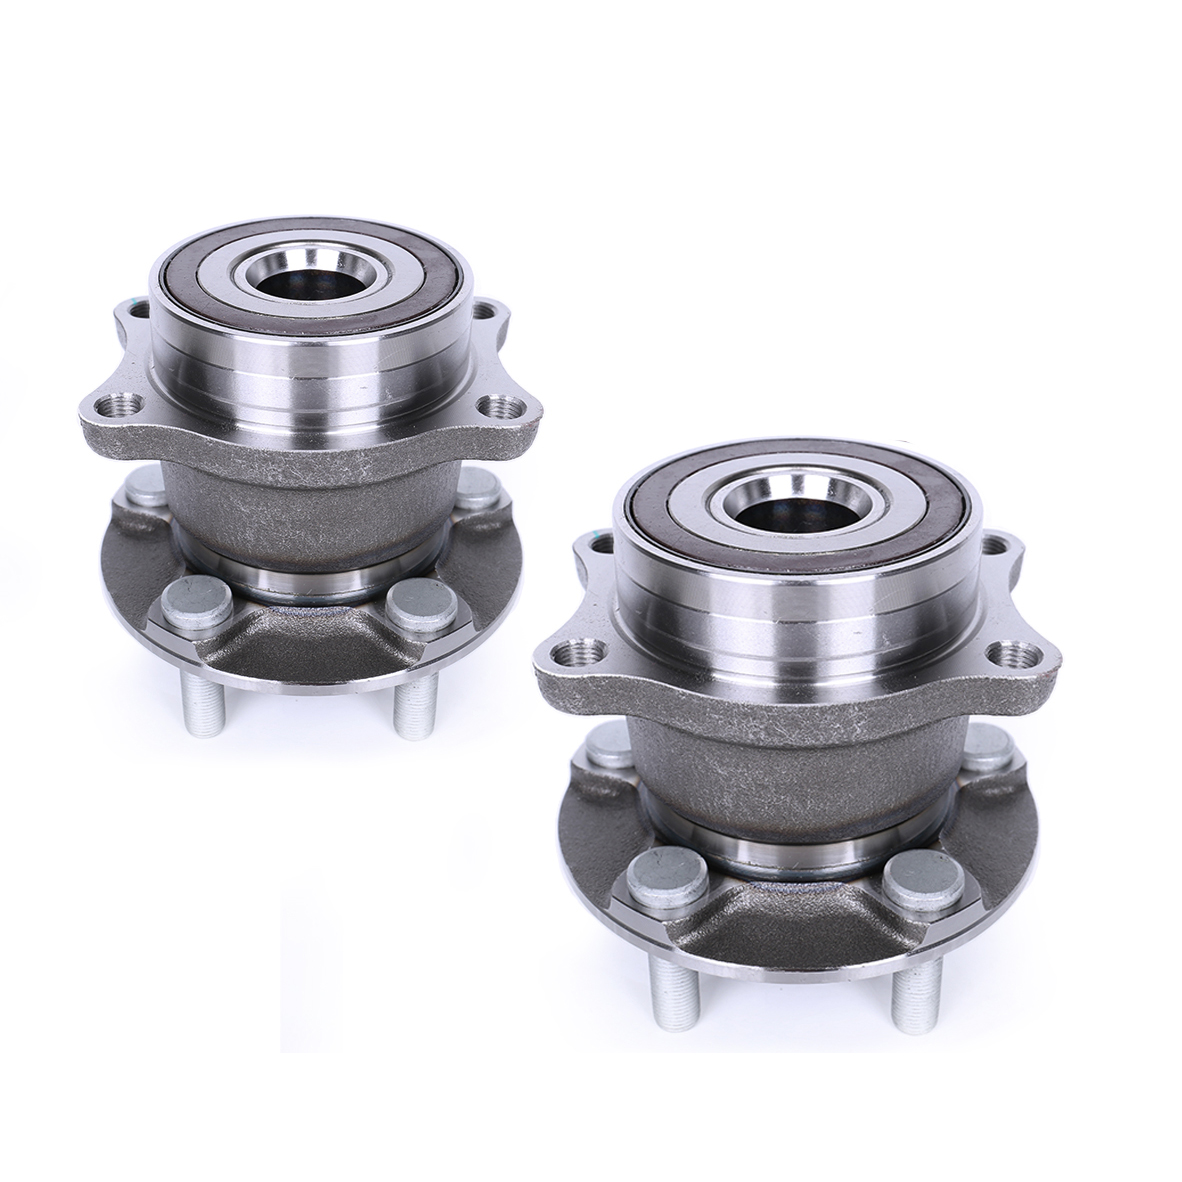 A-Premium Hub and Bearing Assembly Compatible with Subaru Forester 09-13 Impreza 08-14 Legacy Outback 10-14 Crosstrek WRX Scion FR-S Toyota 86 Rear 2-PC Set 